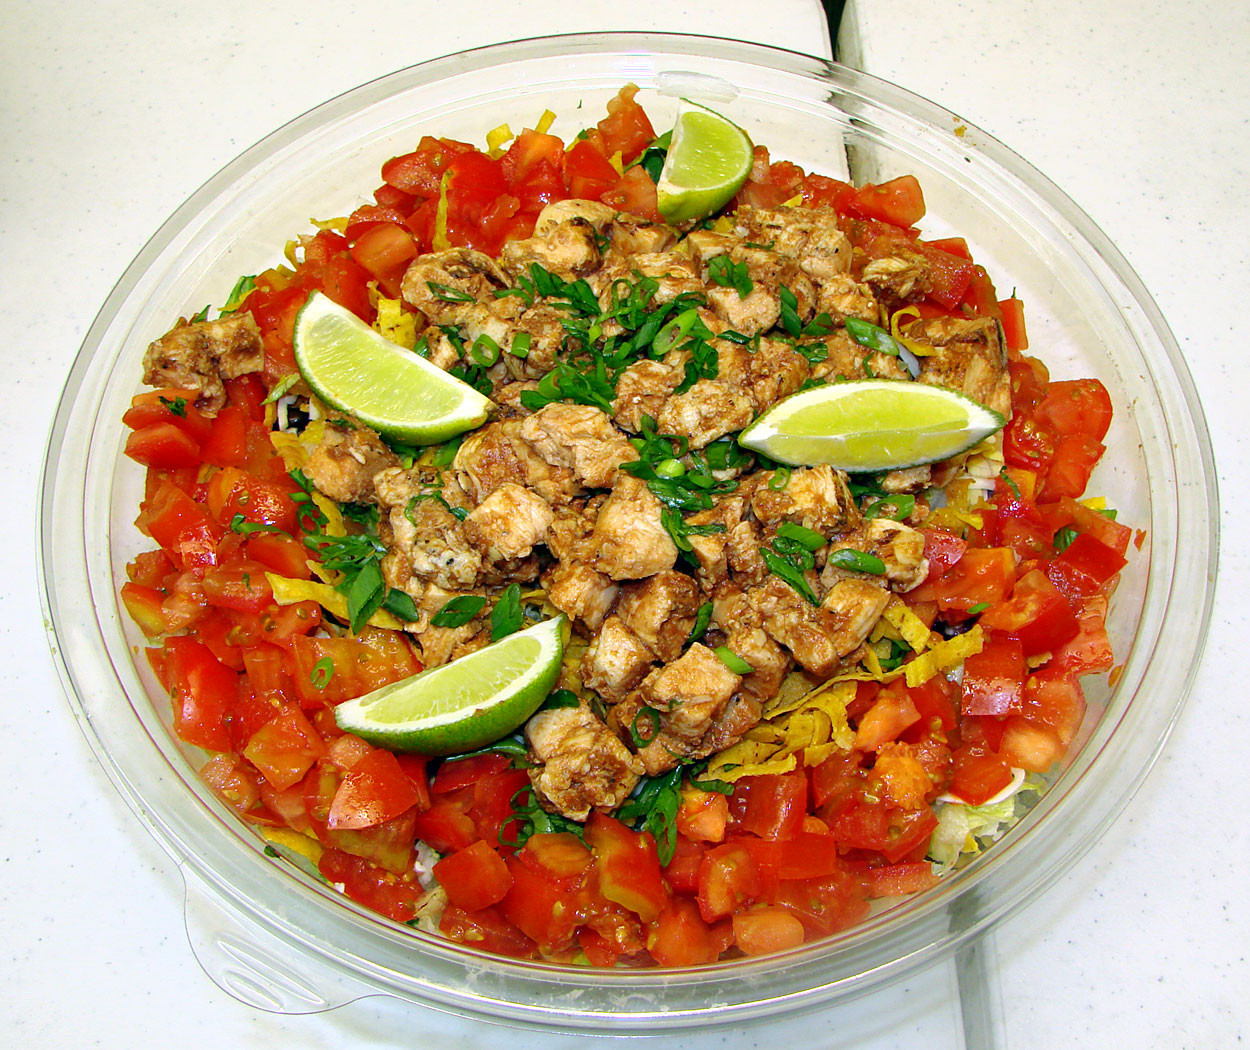 Cpk Bbq Chicken Salad
 A Catered Luncheon by CPK – Tasty Island